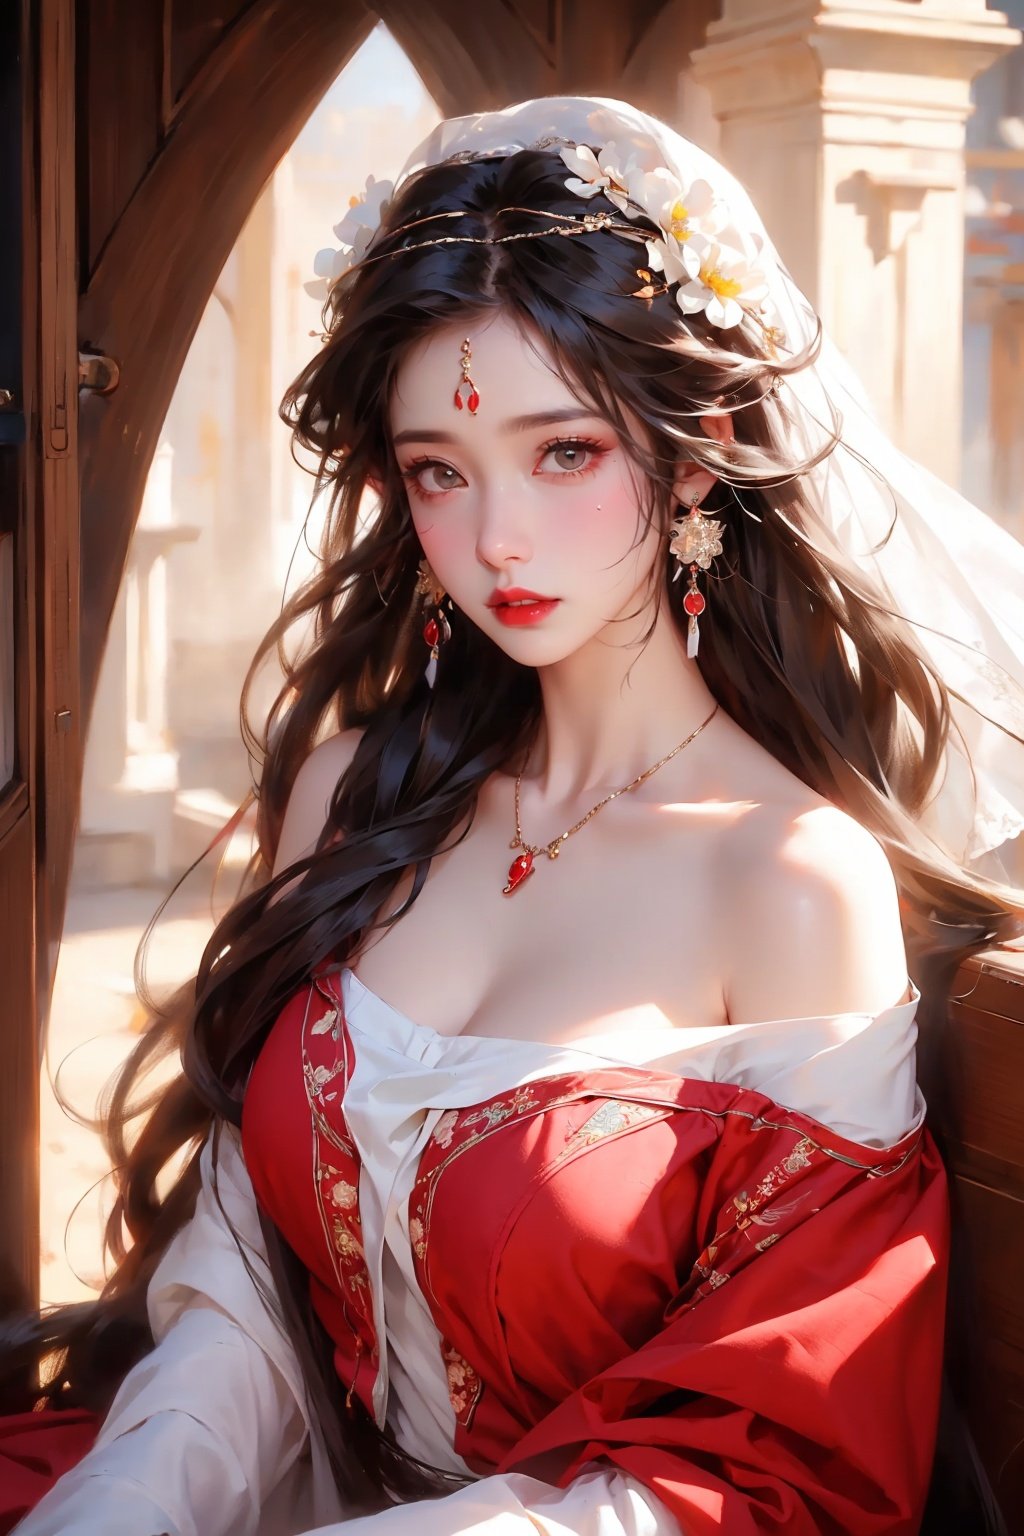  1 girl, jewelry, solo, earrings, long hair, forehead markings, black hair, necklace, bare shoulders, flowers, red lips, hair flowers, upper body, skirt, off shoulder, facial markings, head down, makeup, lips, candles, collarbones, long sleeves, tears streaming down, crying, Tyndall effect, 8k, large aperture, masterpiece of the century, sit, maple leaf, doorway, corridor, Sun on face,